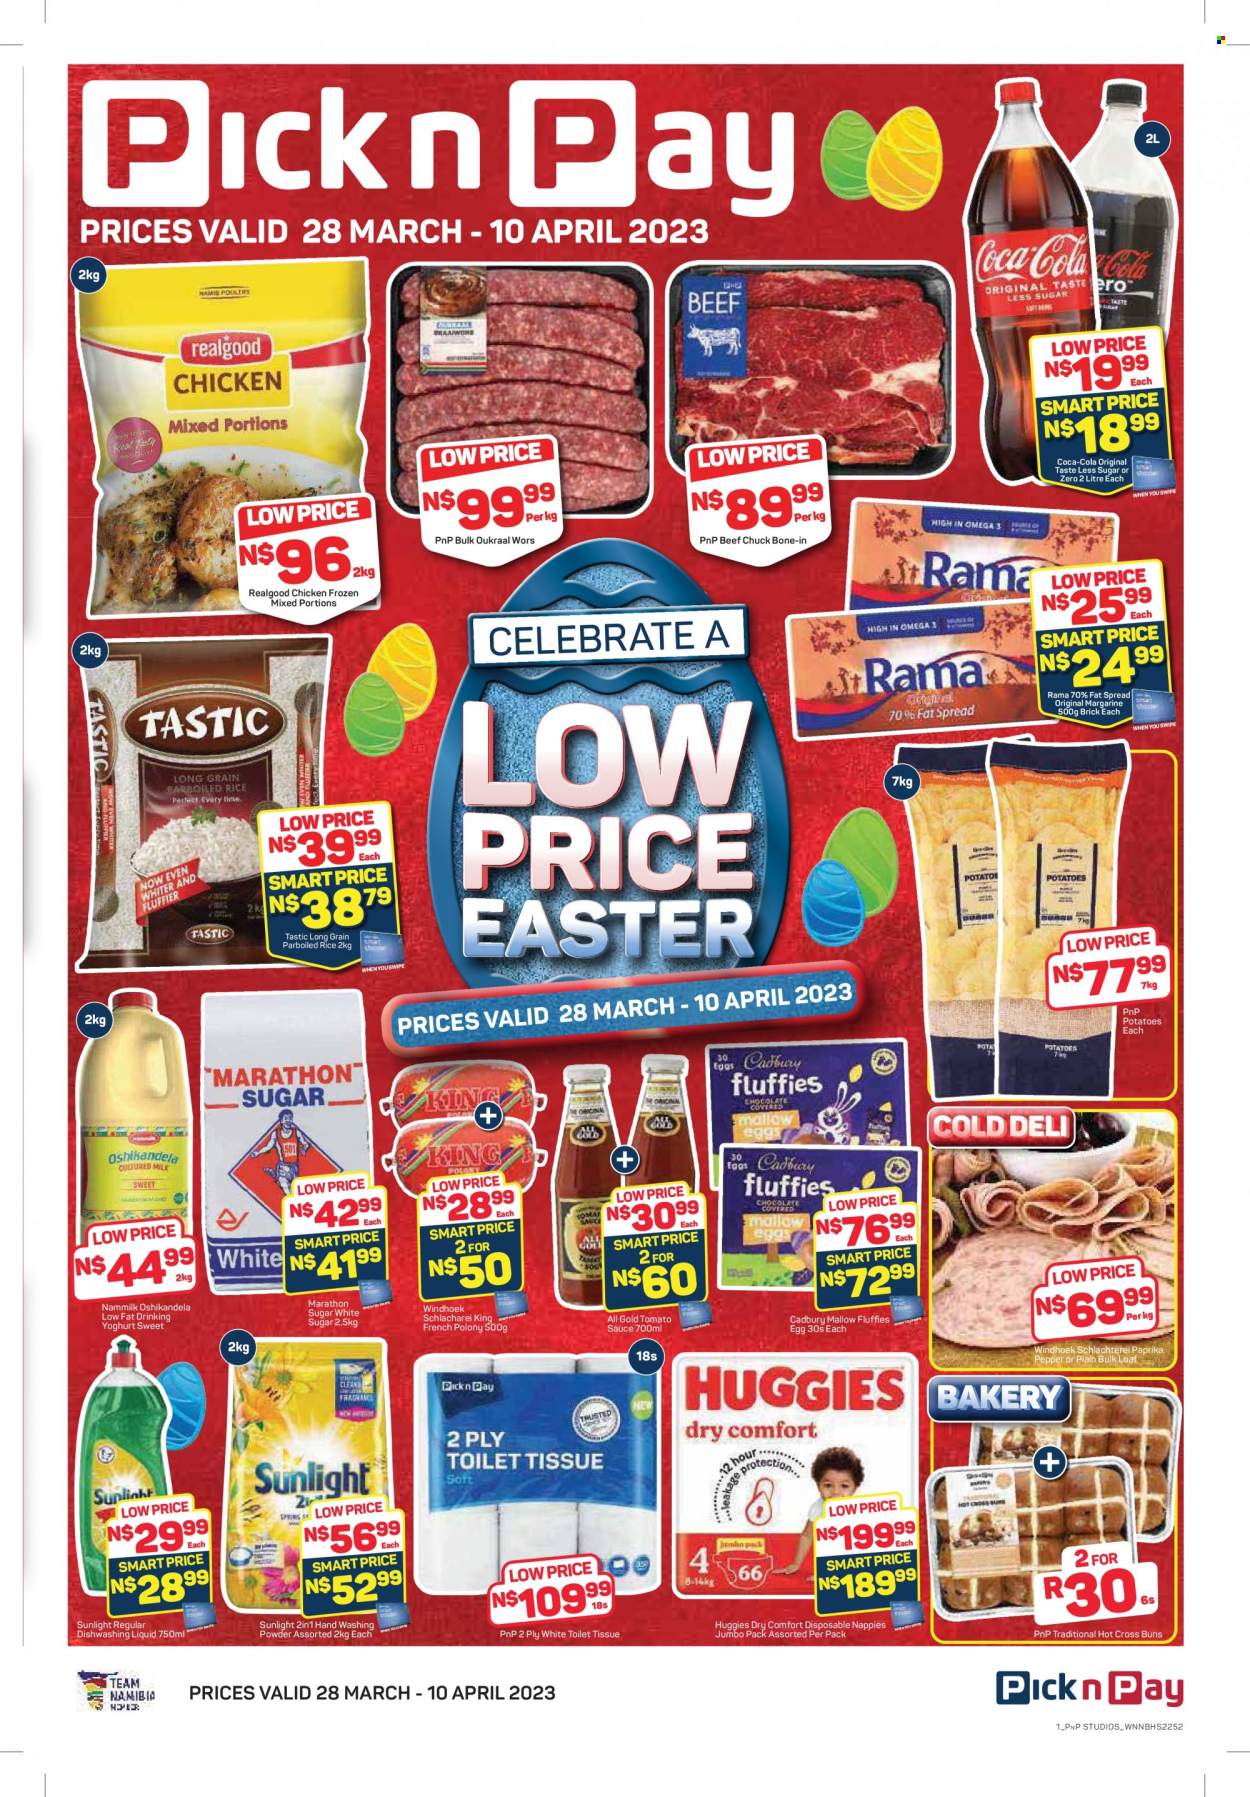 thumbnail - Pick n Pay catalogue  - 28/03/2023 - 10/04/2023 - Sales products - buns, potatoes, sauce, french polony, polony, yoghurt, yoghurt drink, eggs, margarine, fat spread, Rama, Cadbury, tomato sauce, rice, parboiled rice, Tastic, pepper, Coca-Cola, chicken, Huggies, nappies, laundry powder, Sunlight, dishwashing liquid. Page 1.